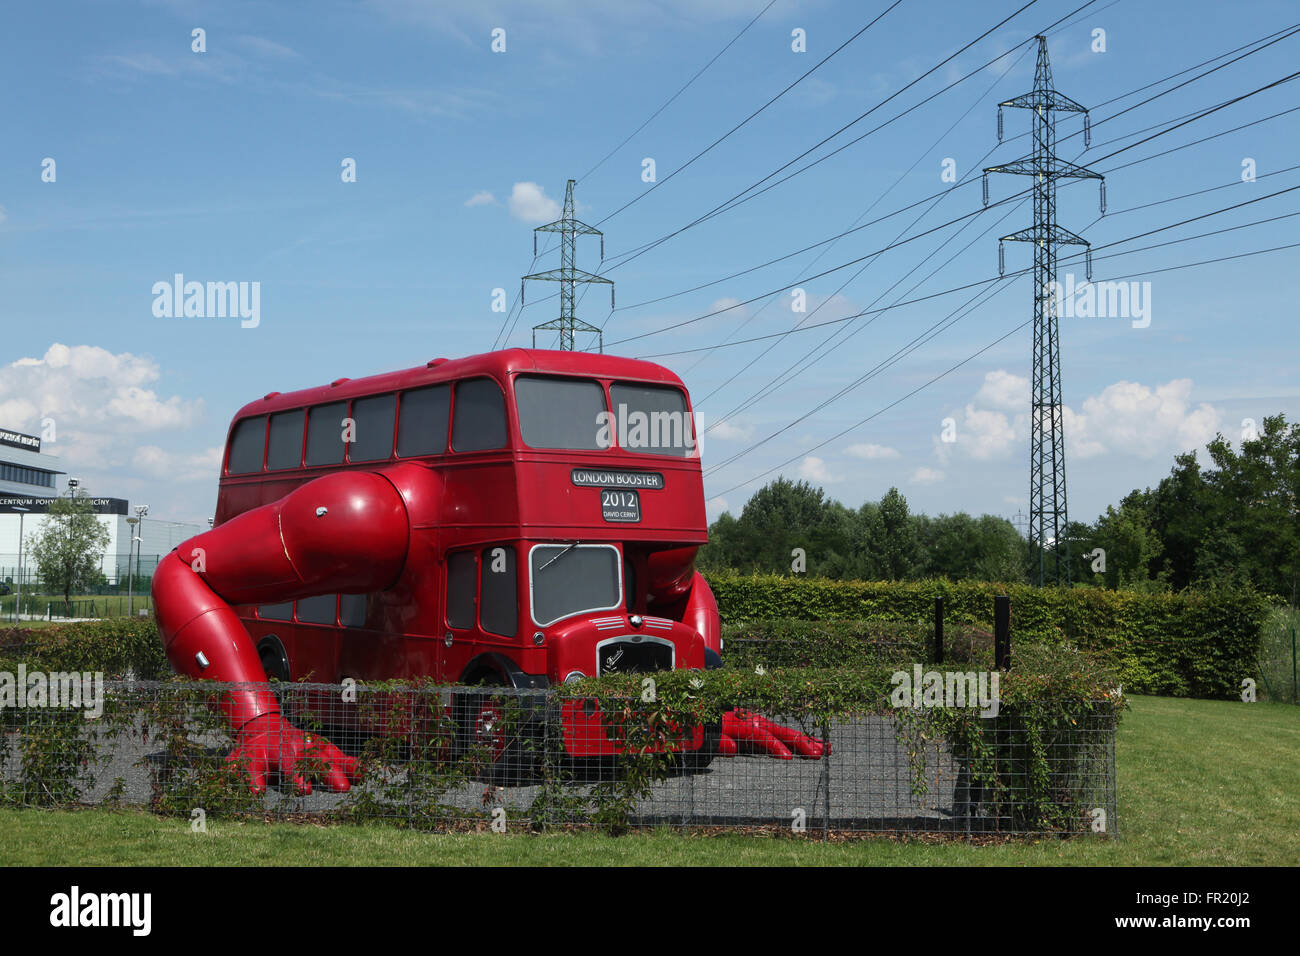 Art installation London Booster (2012) created by Czech visual artist David Cerny seen parked in Chodov district in Prague, Czech Republic. Famous art installation London Booster was created by David Cerny from a 1957 London double-decker bus for the 2012 Summer Olympics in London, UK. Stock Photo